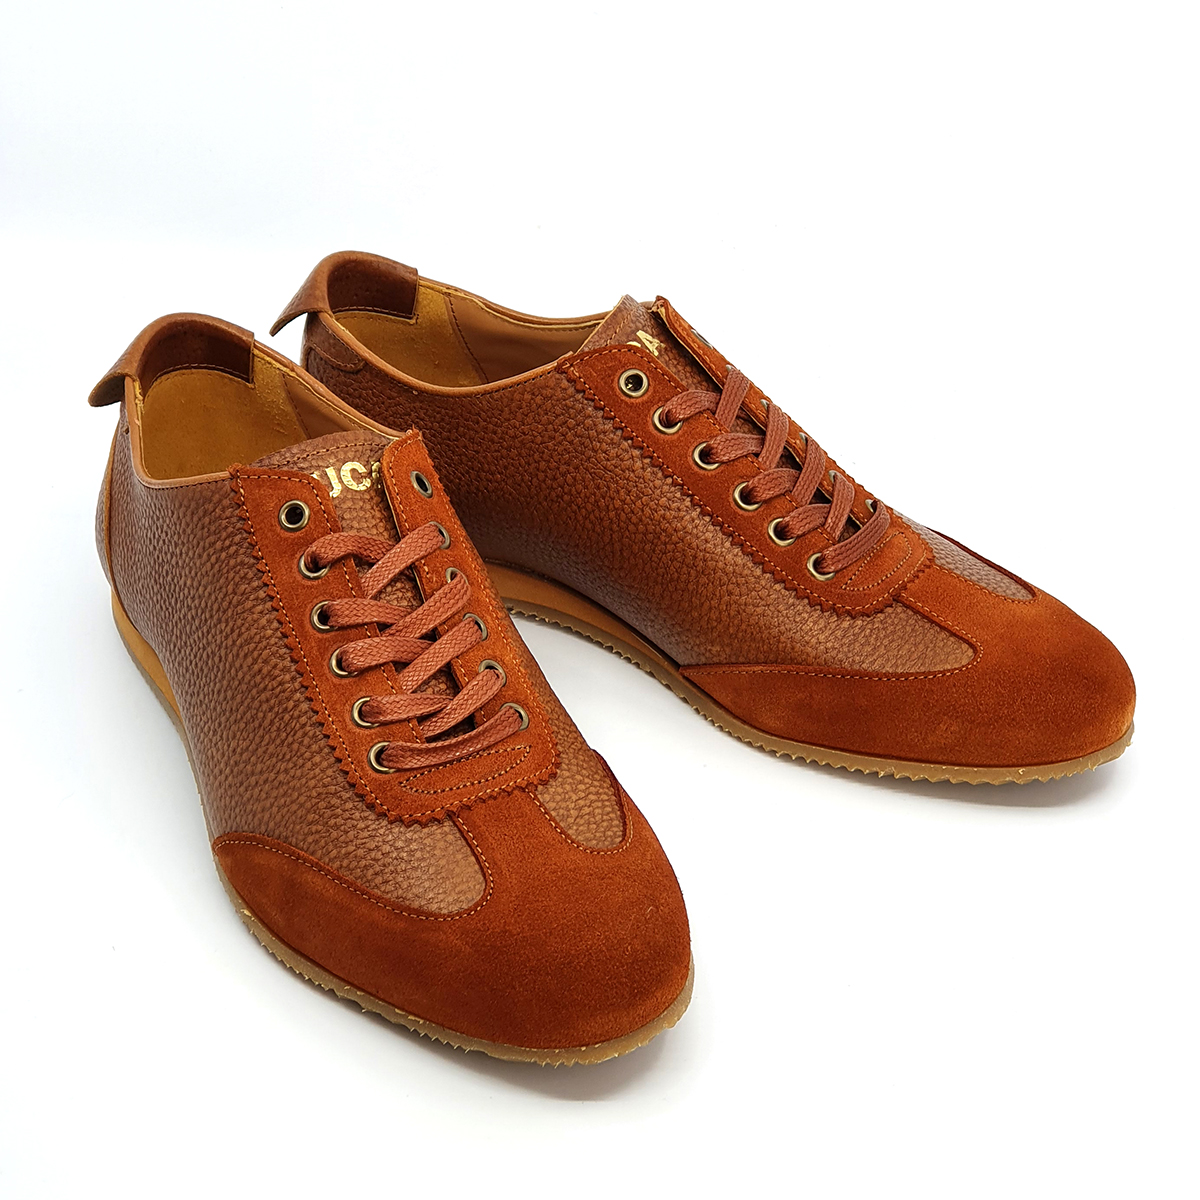 The Luca In Chestnut Leather & Suede – Old School Trainers – Mod Shoes